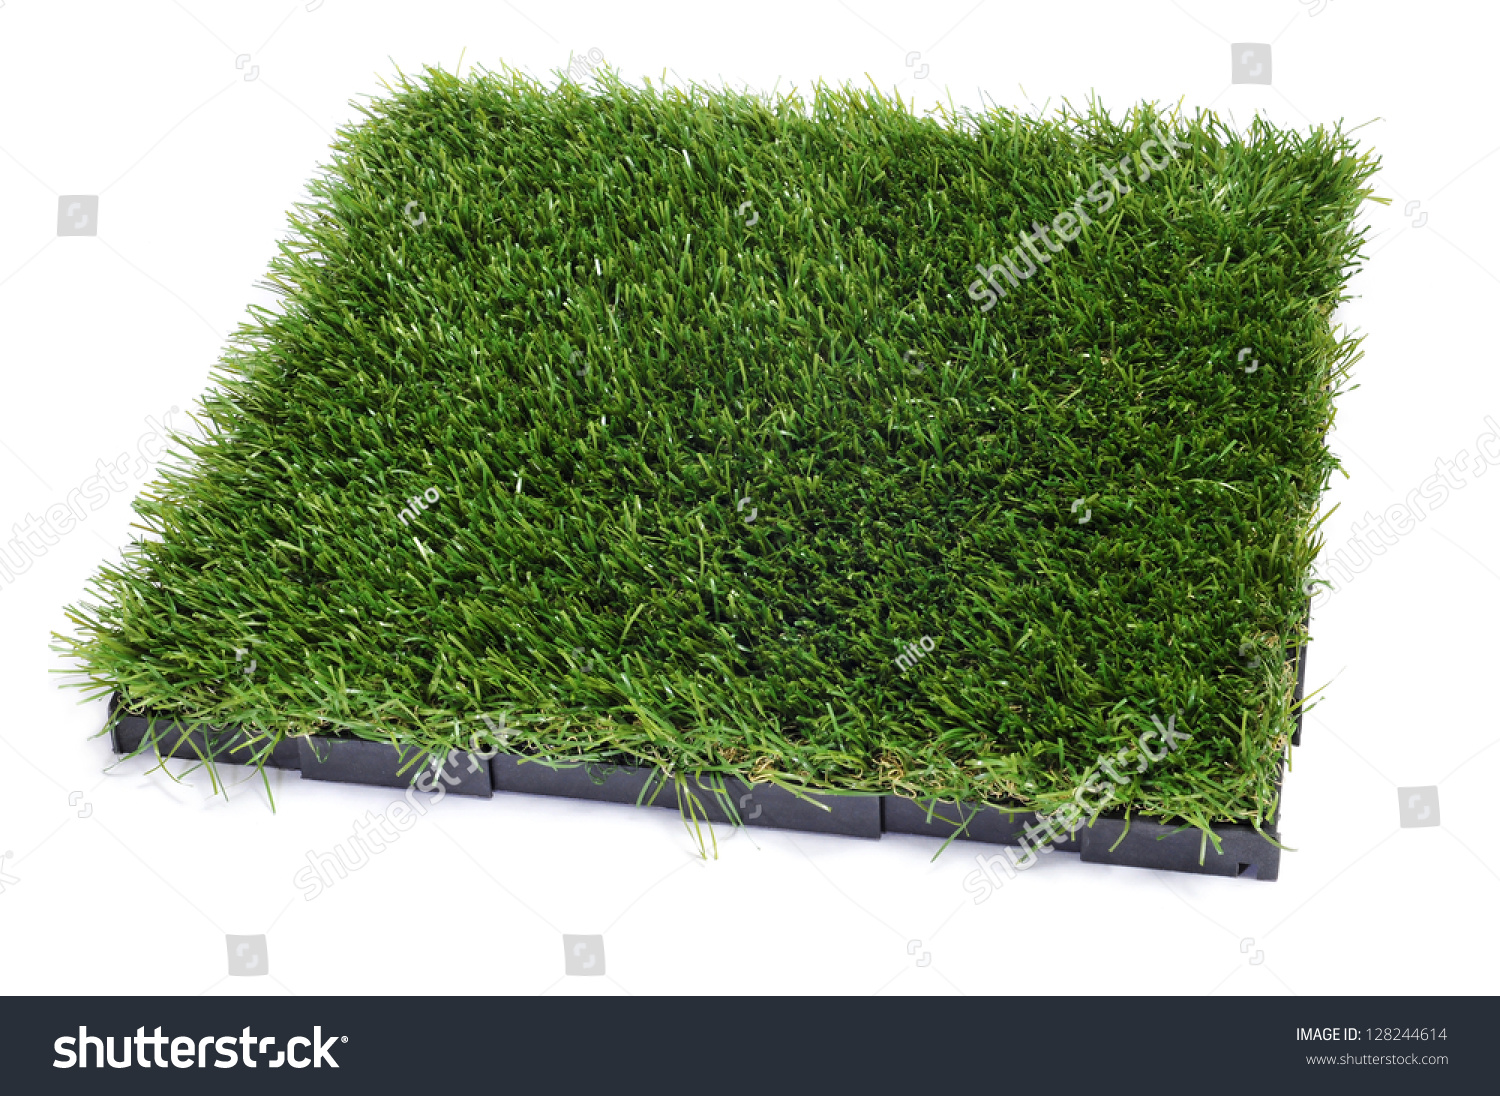 artificial turf tile on a white background #128244614